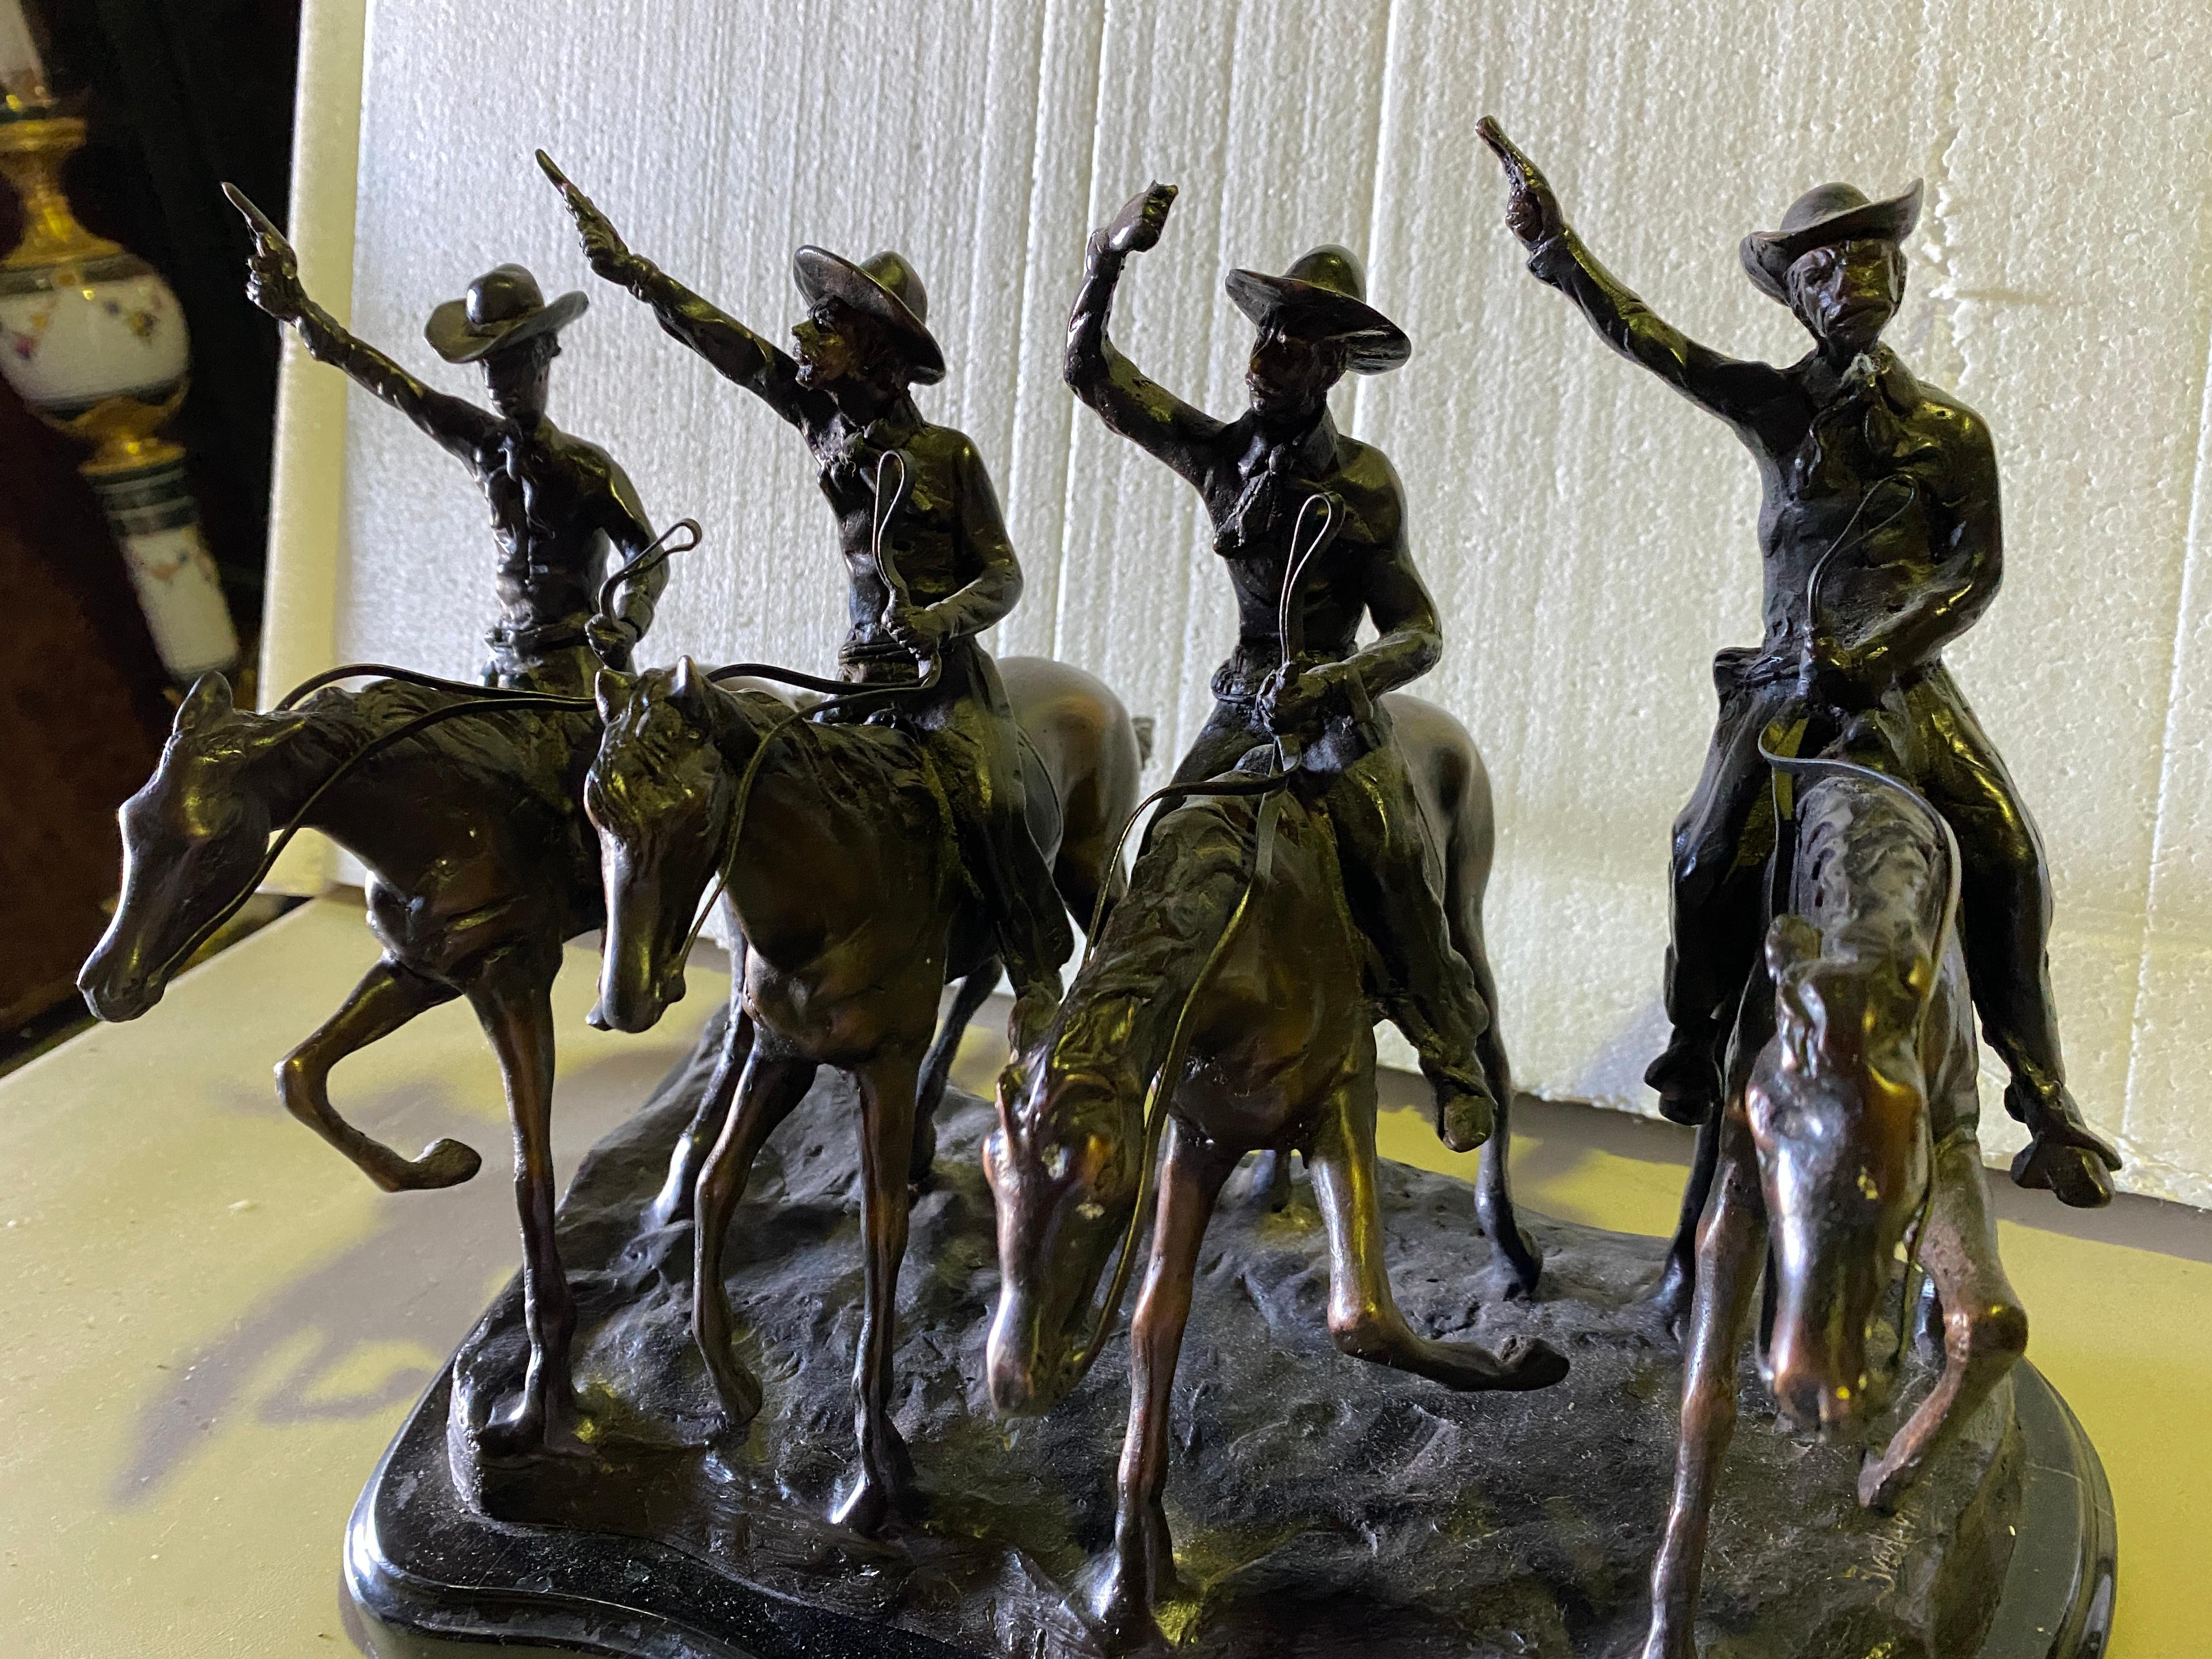 12" Tall x 14" Wide Bronze Sculpture Titled "Coming Thru The Rye" By: Frederic Remington